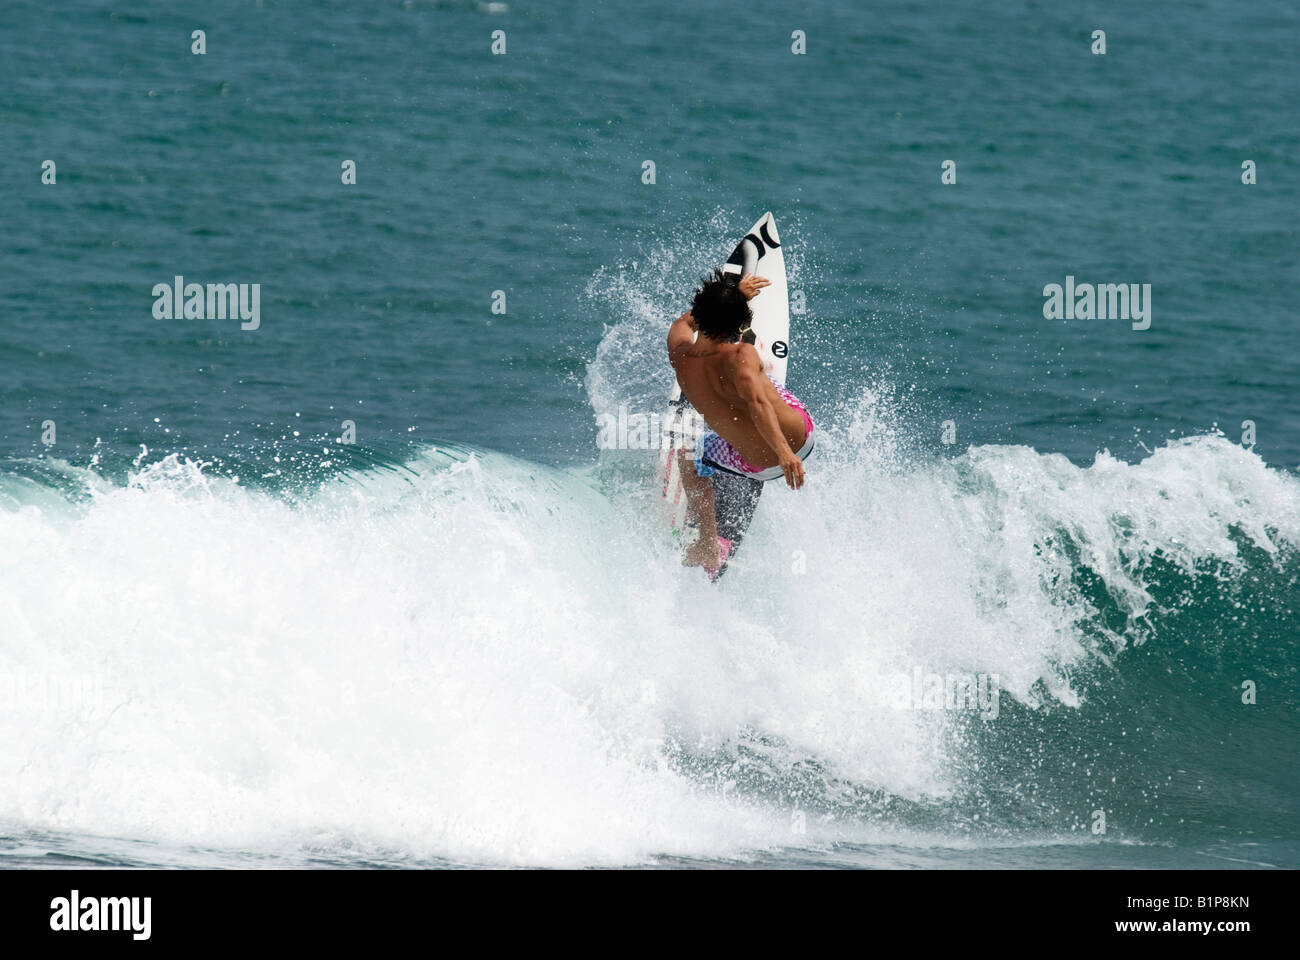 pro surfer Kalani Robb surfing in Bali a left hander green blue wave actioning a off the lip trick Stock Photo